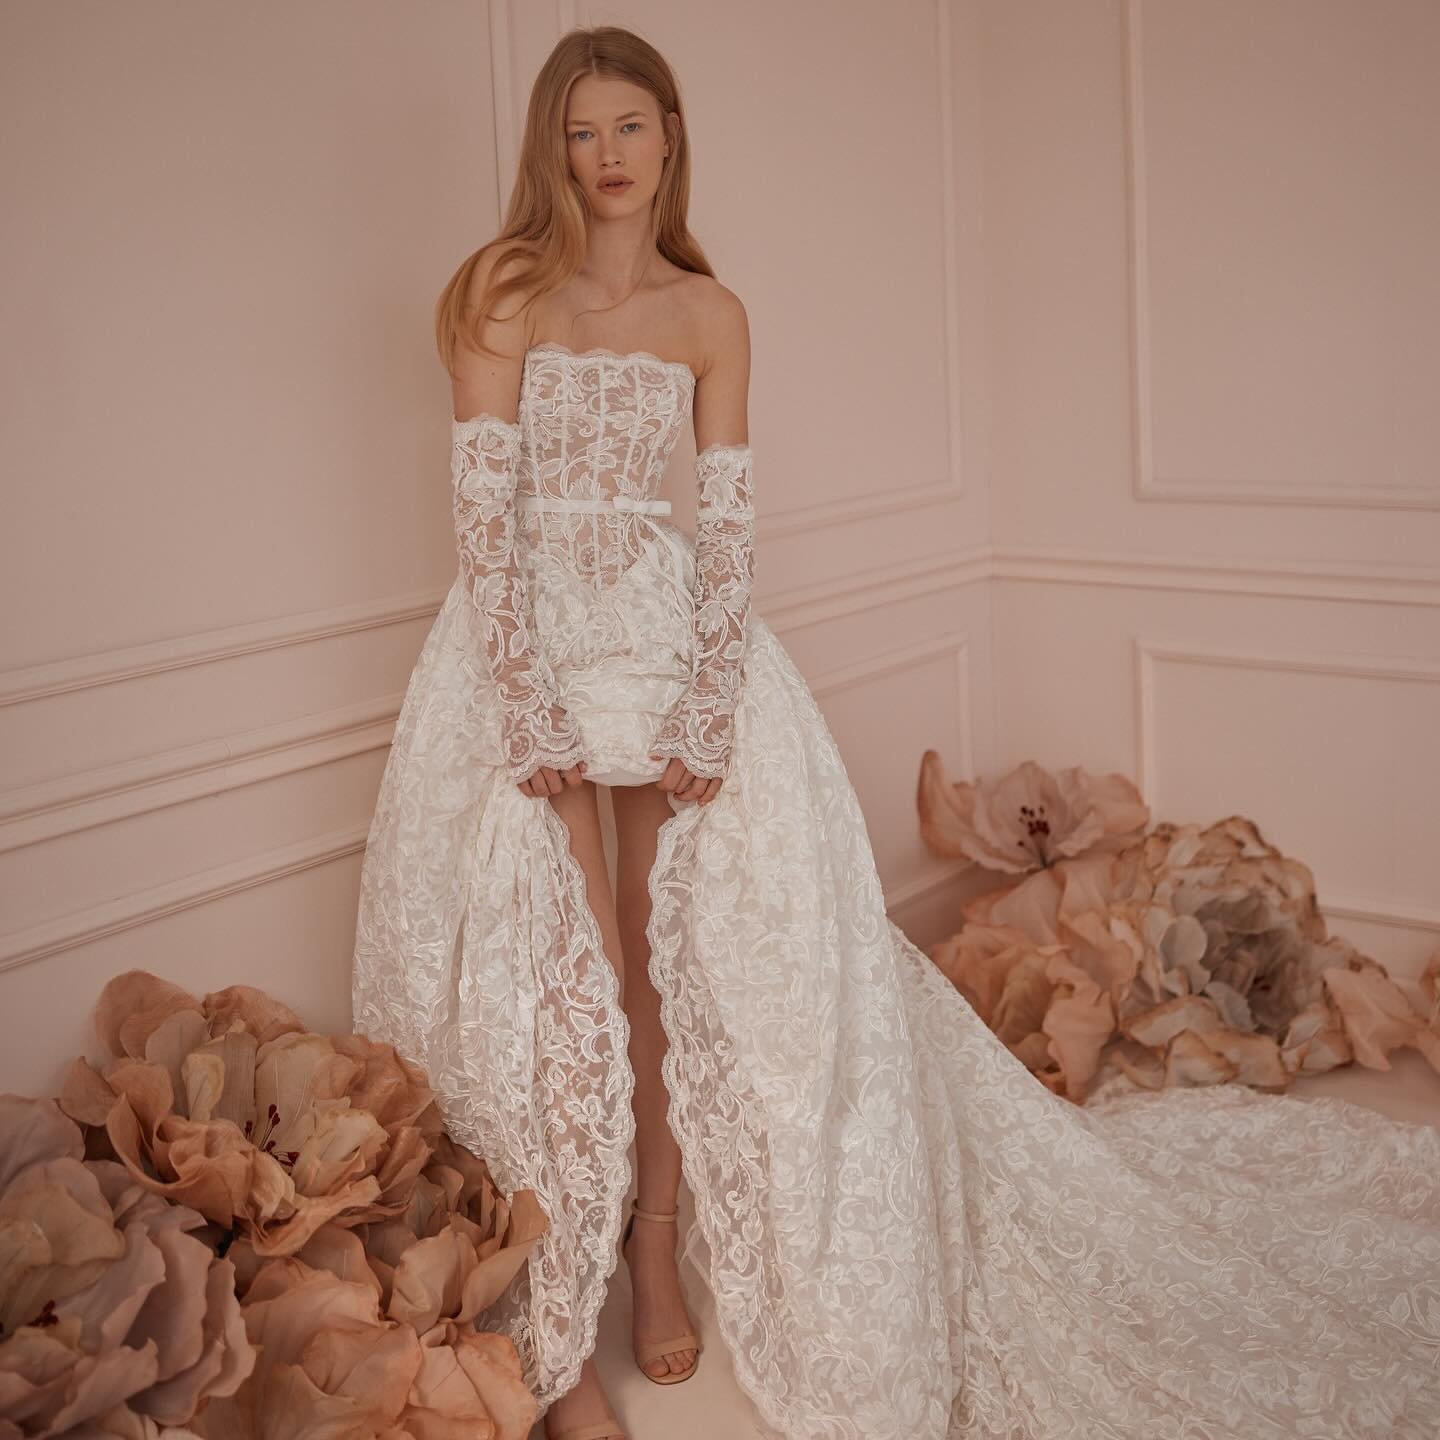 A rose is a rose unless it&rsquo;s Ros&eacute; &mdash; for the debut Spring Capsule Collection of @eisen.stein.bridal we are giving you both.

Please join us on Thursday, May 9th between 3pm - 6pm for a flowering reception welcoming the designer Yael